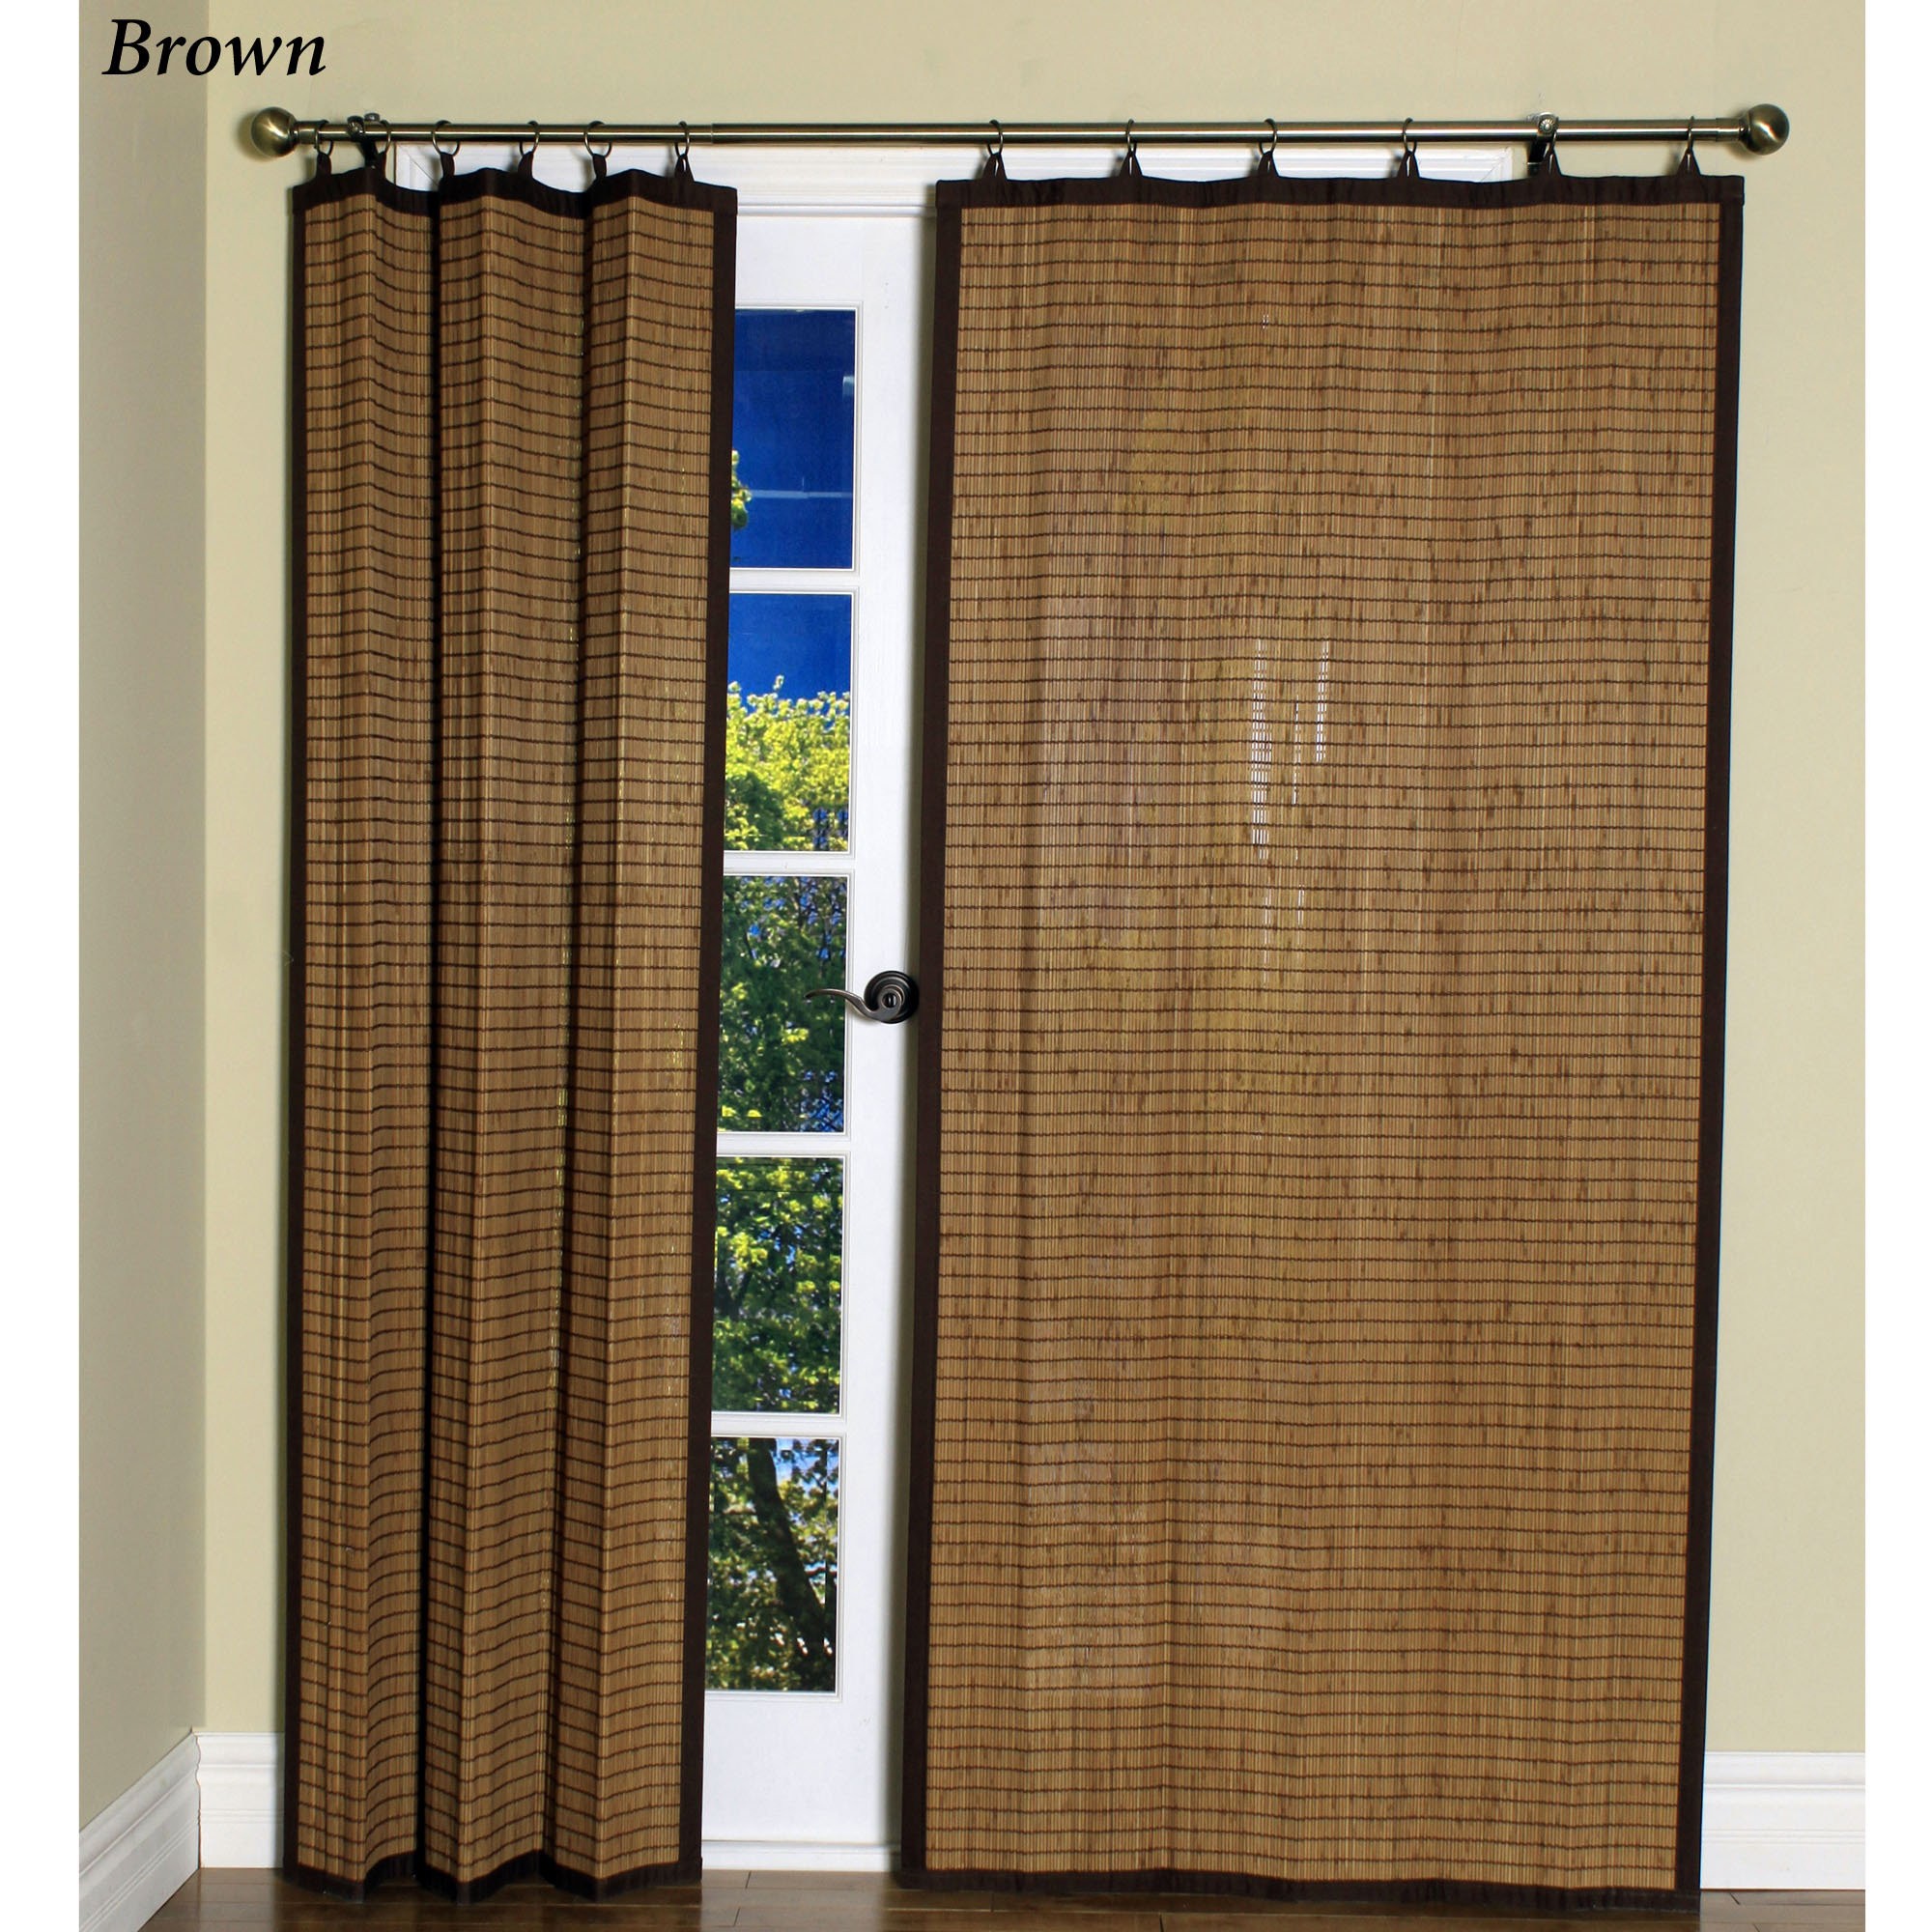 seemly-d-bamboo-curtain-panels-outdoor-versailles-bamboo-curtain-panels-bamboo-panel-curtains-uk-bamboo-grommet-curtain-panels-bamboo-curtain-panels-sale-bamboo-sliding-curtain-panels-wat_curtains-for-sale.jpg